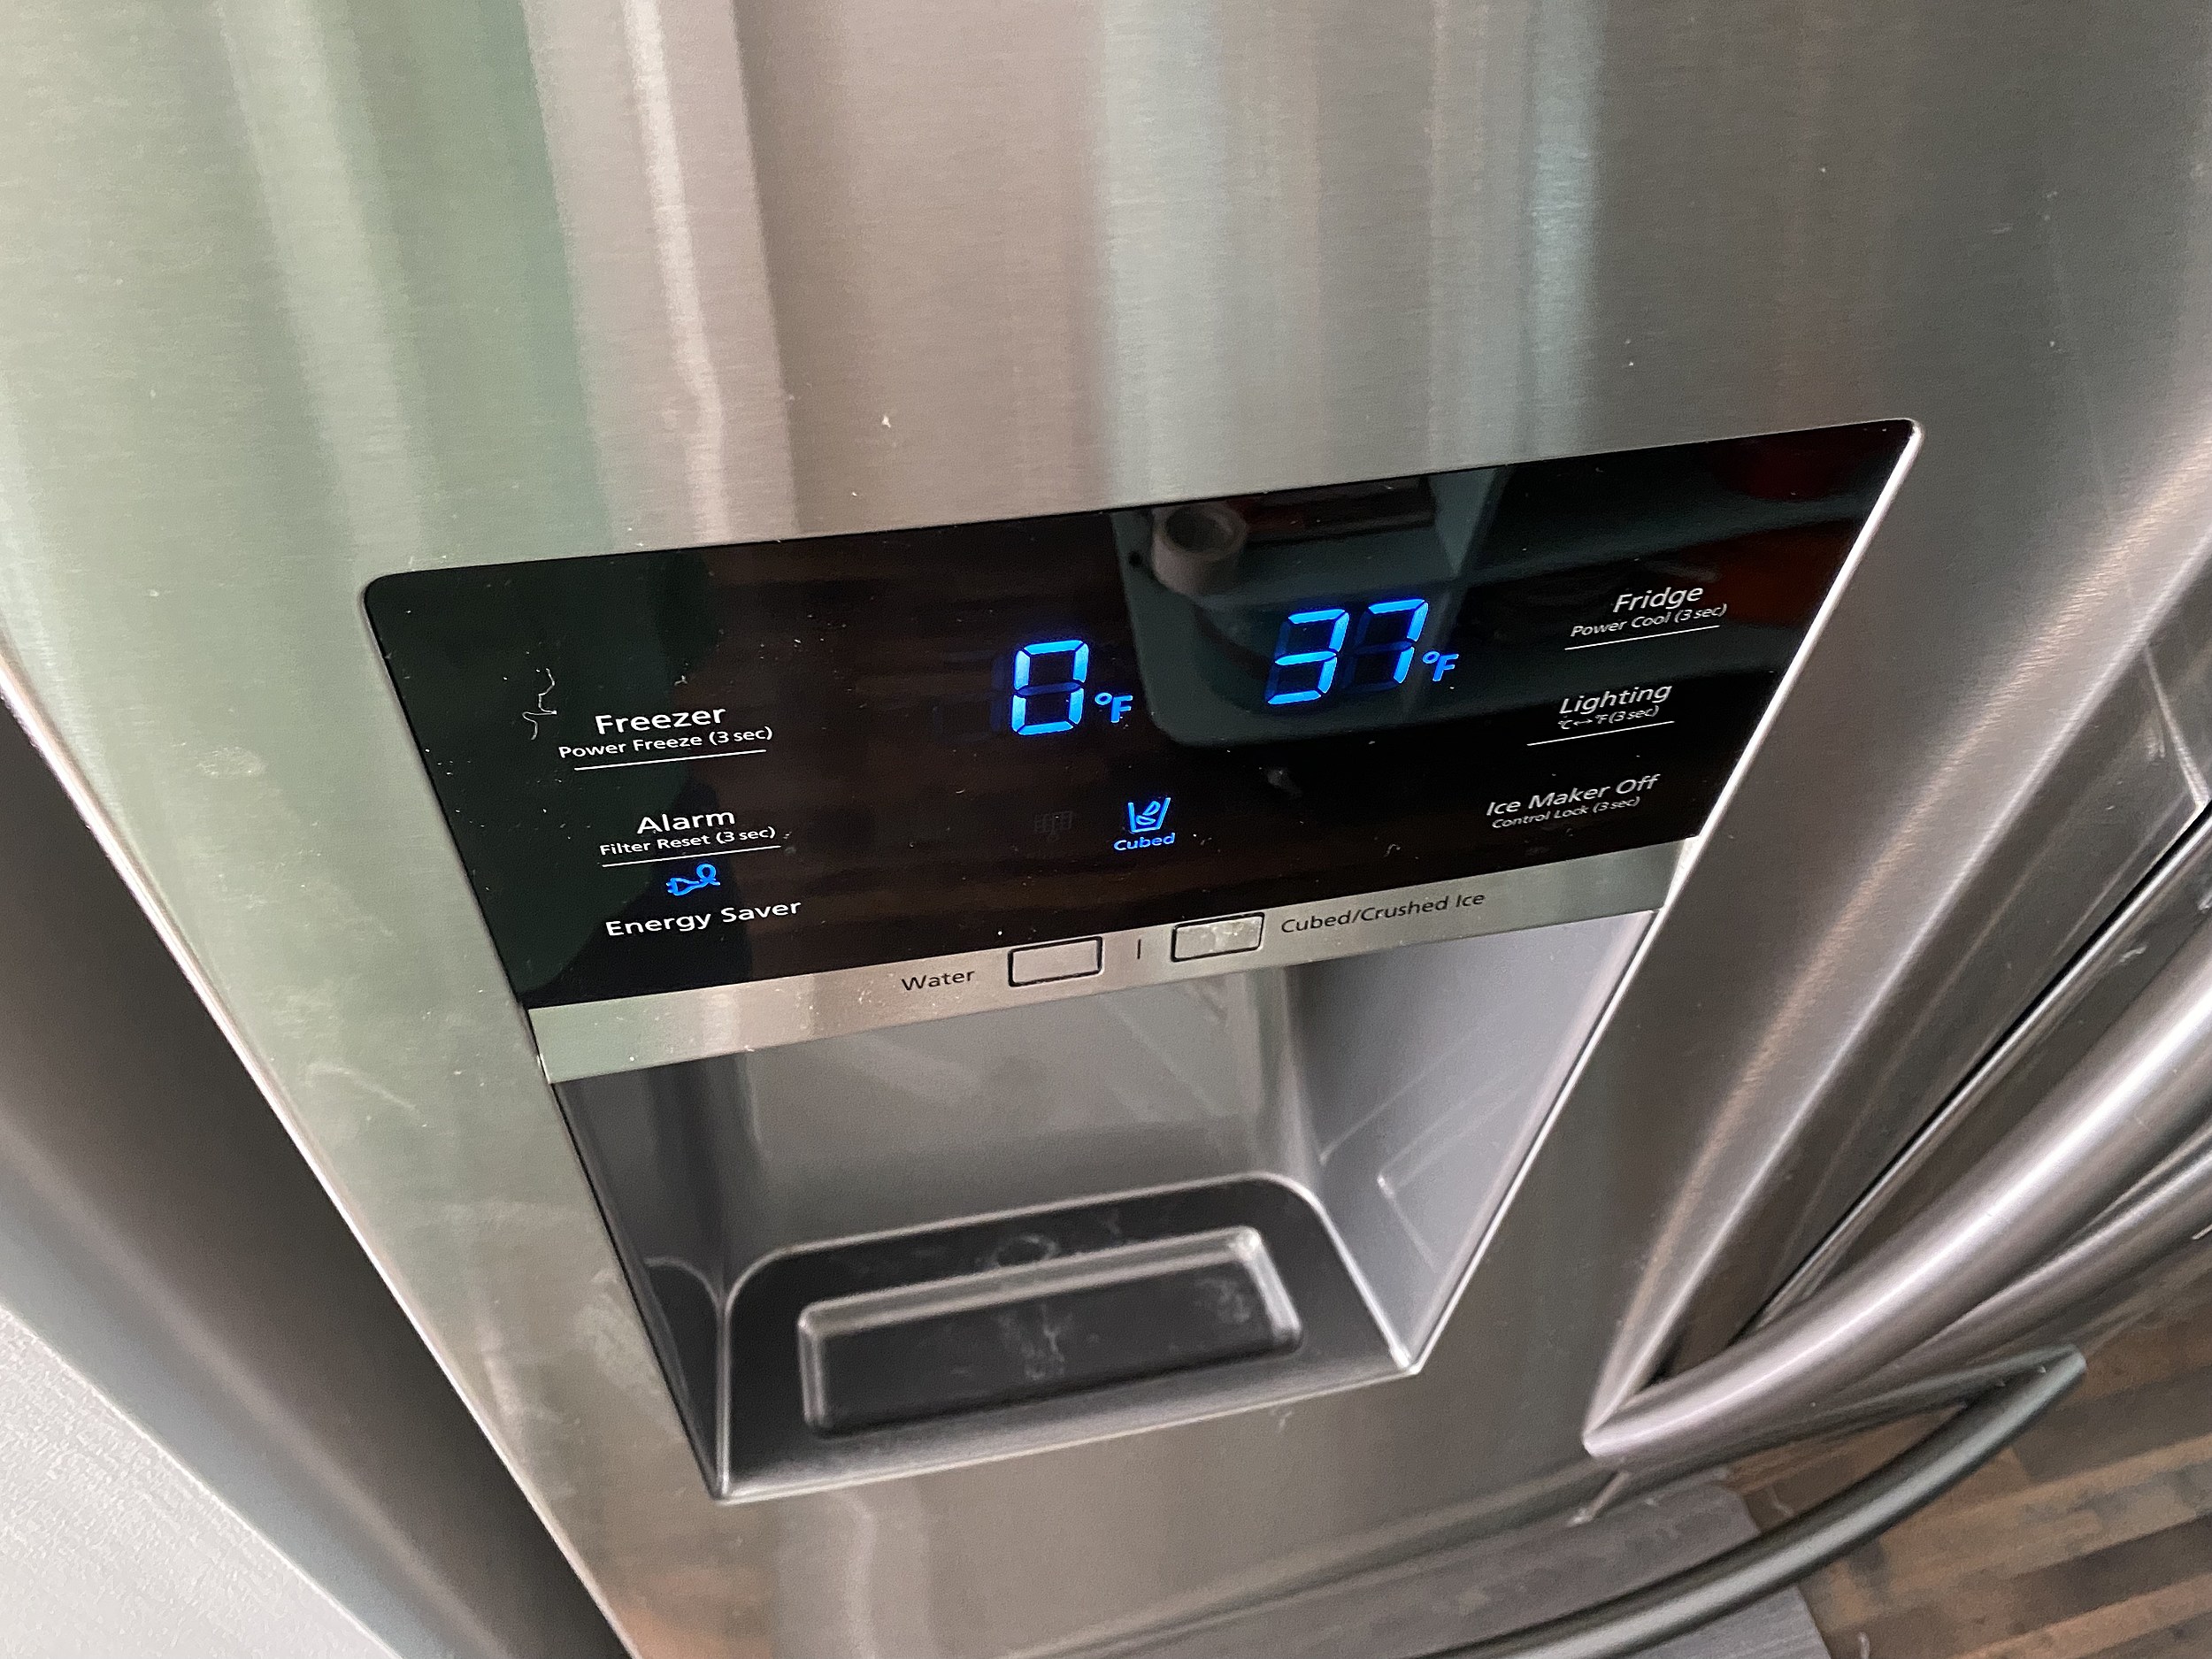 Ice Maker Problems with Samsung Refrigerator? Don't Do This!